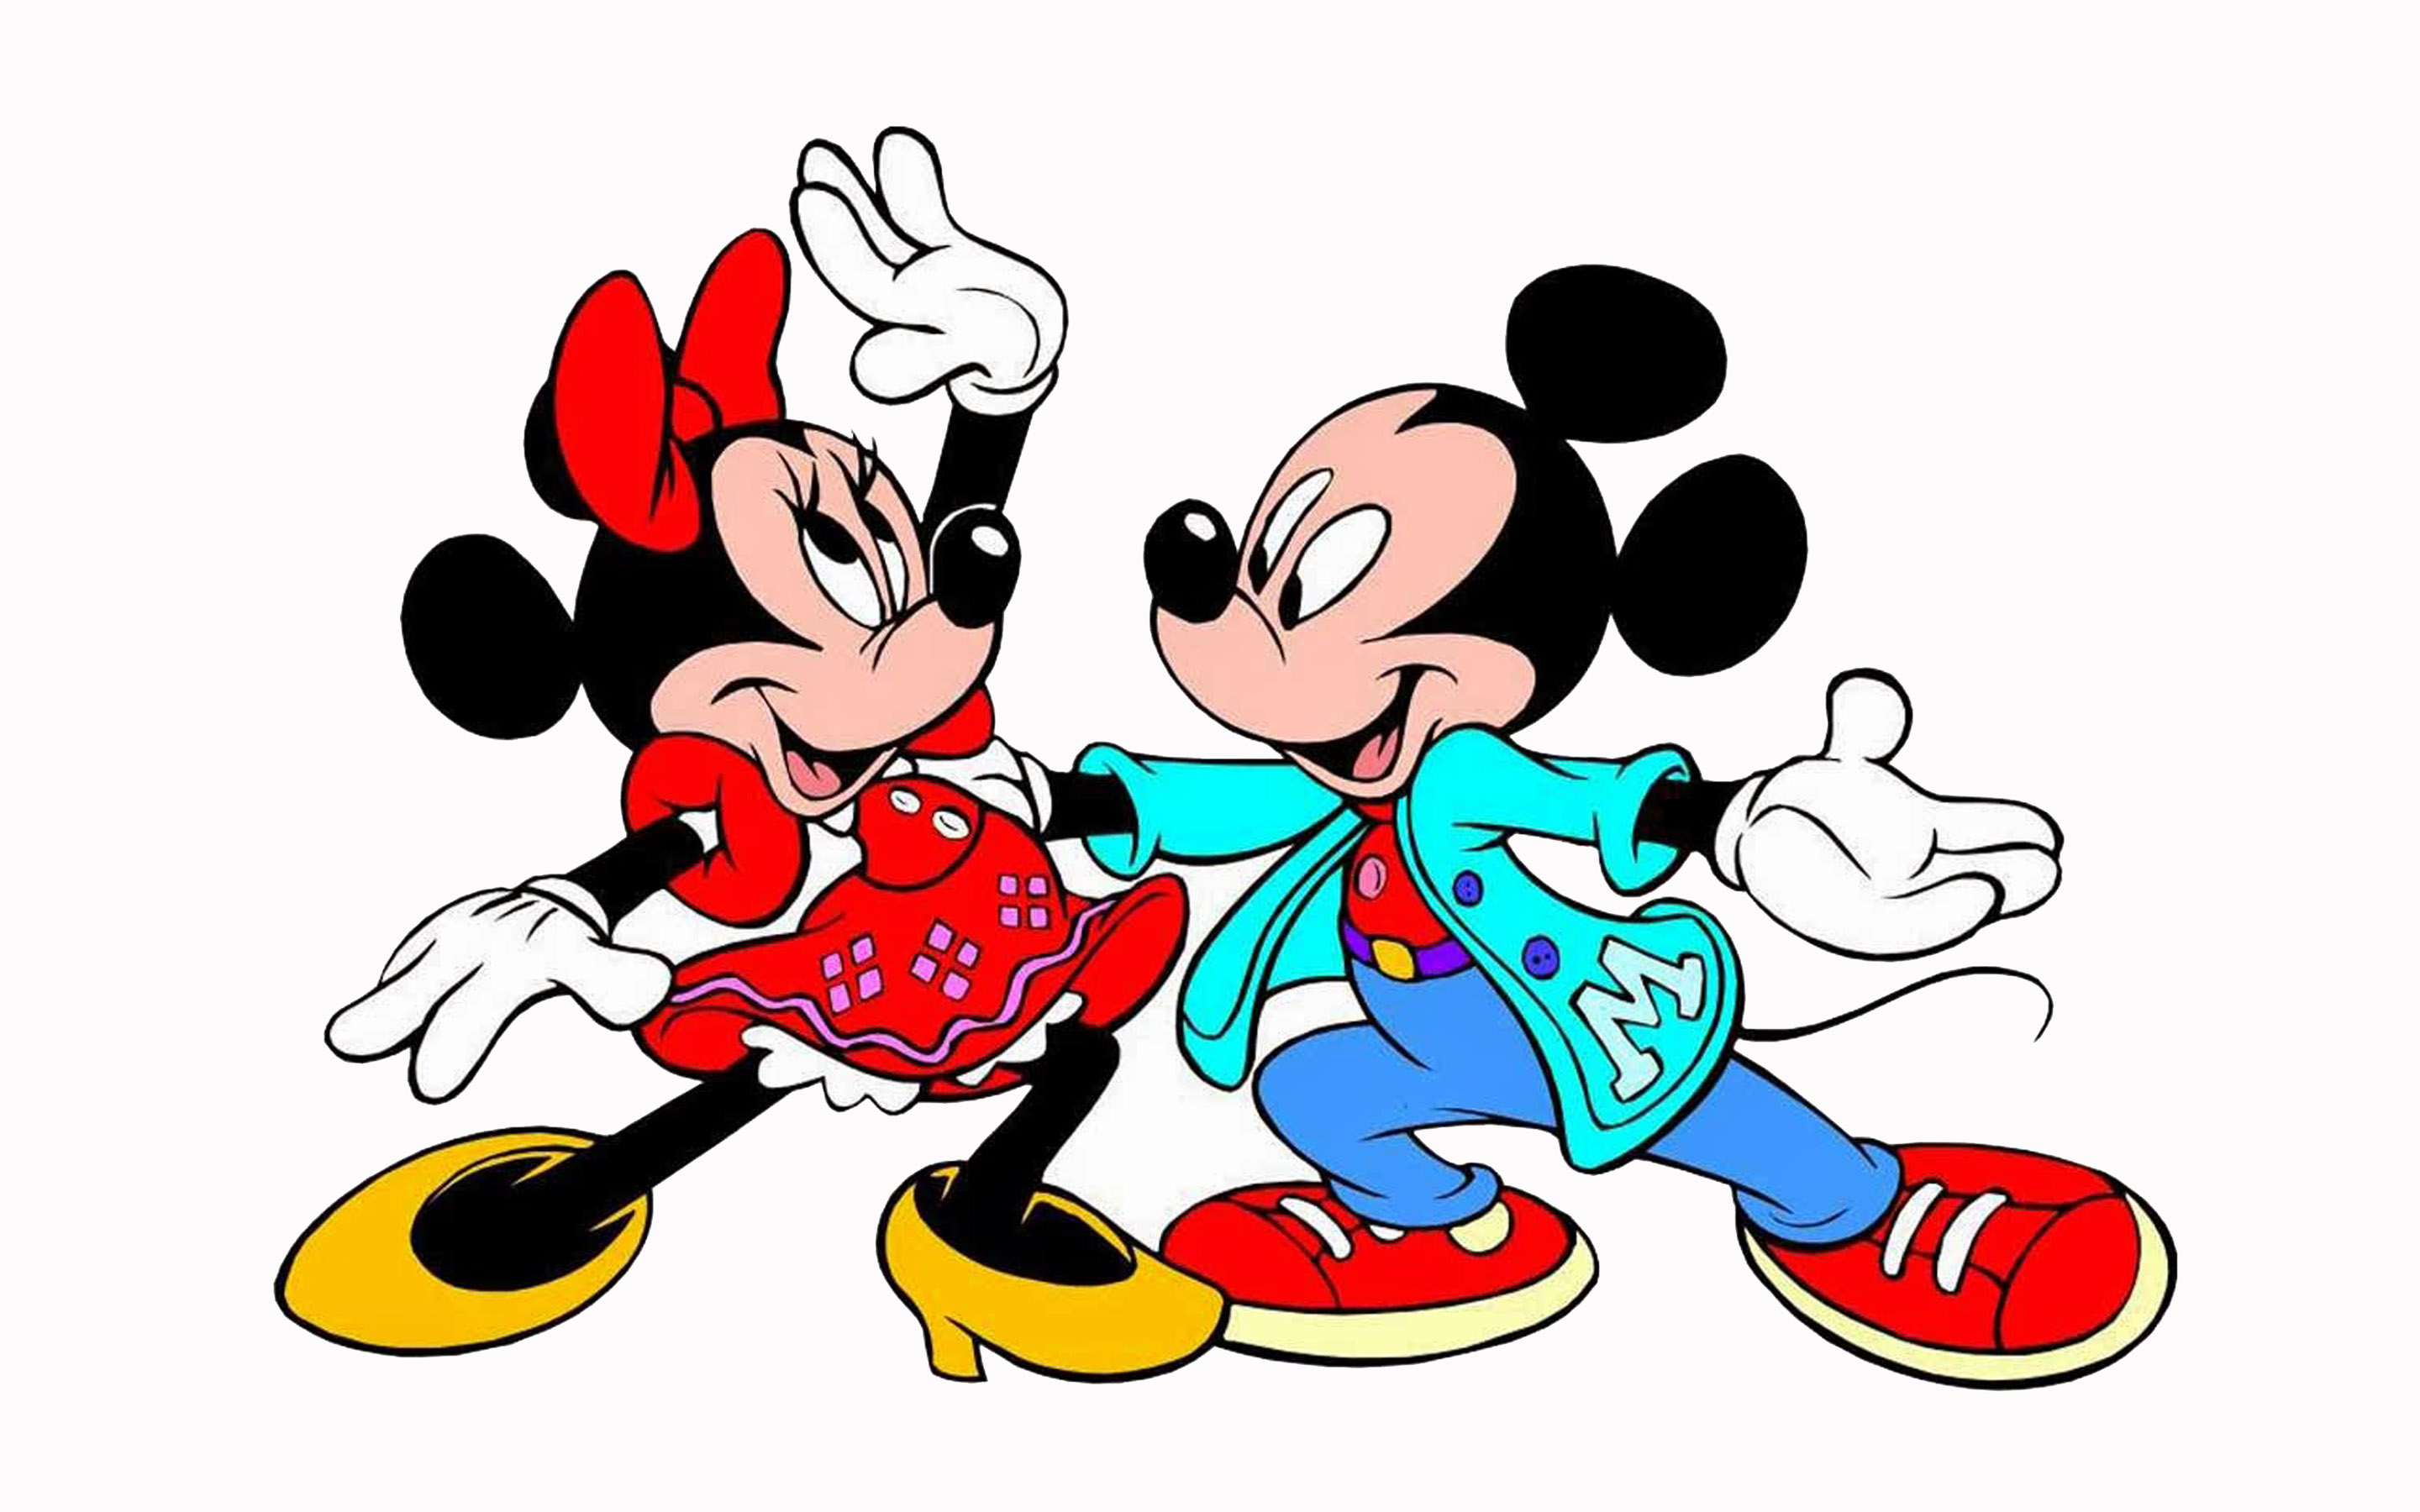 Download Original Resolution - Minnie Mouse And Mickey Mouse Dancing , HD Wallpaper & Backgrounds